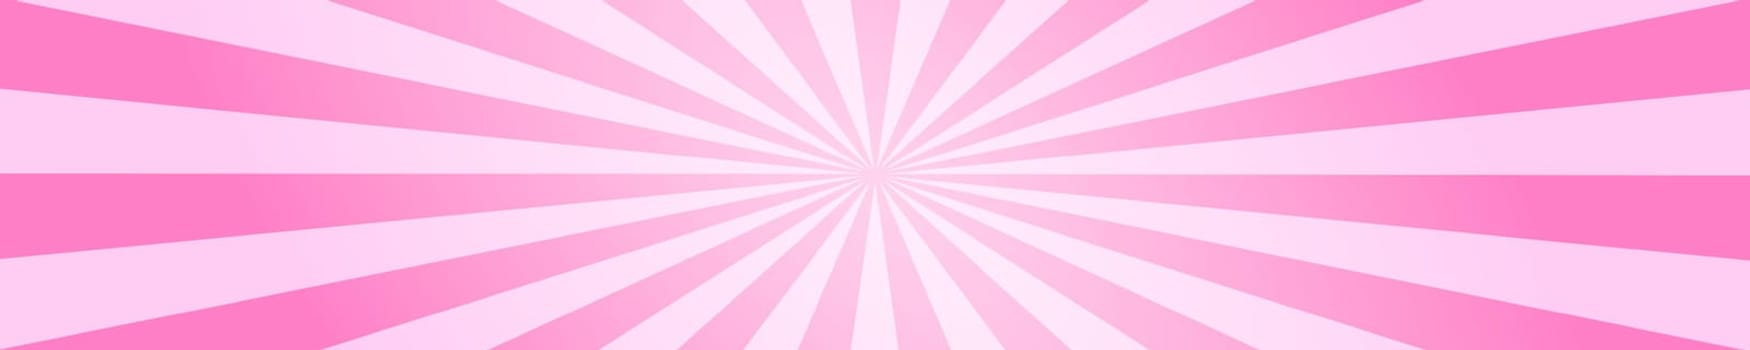 Circus or carnival pattern with pink radial stripes. Rosy sunburst, explosion or surprise effect, manga background. Bubble gum, lollipop candy, ice cream texture